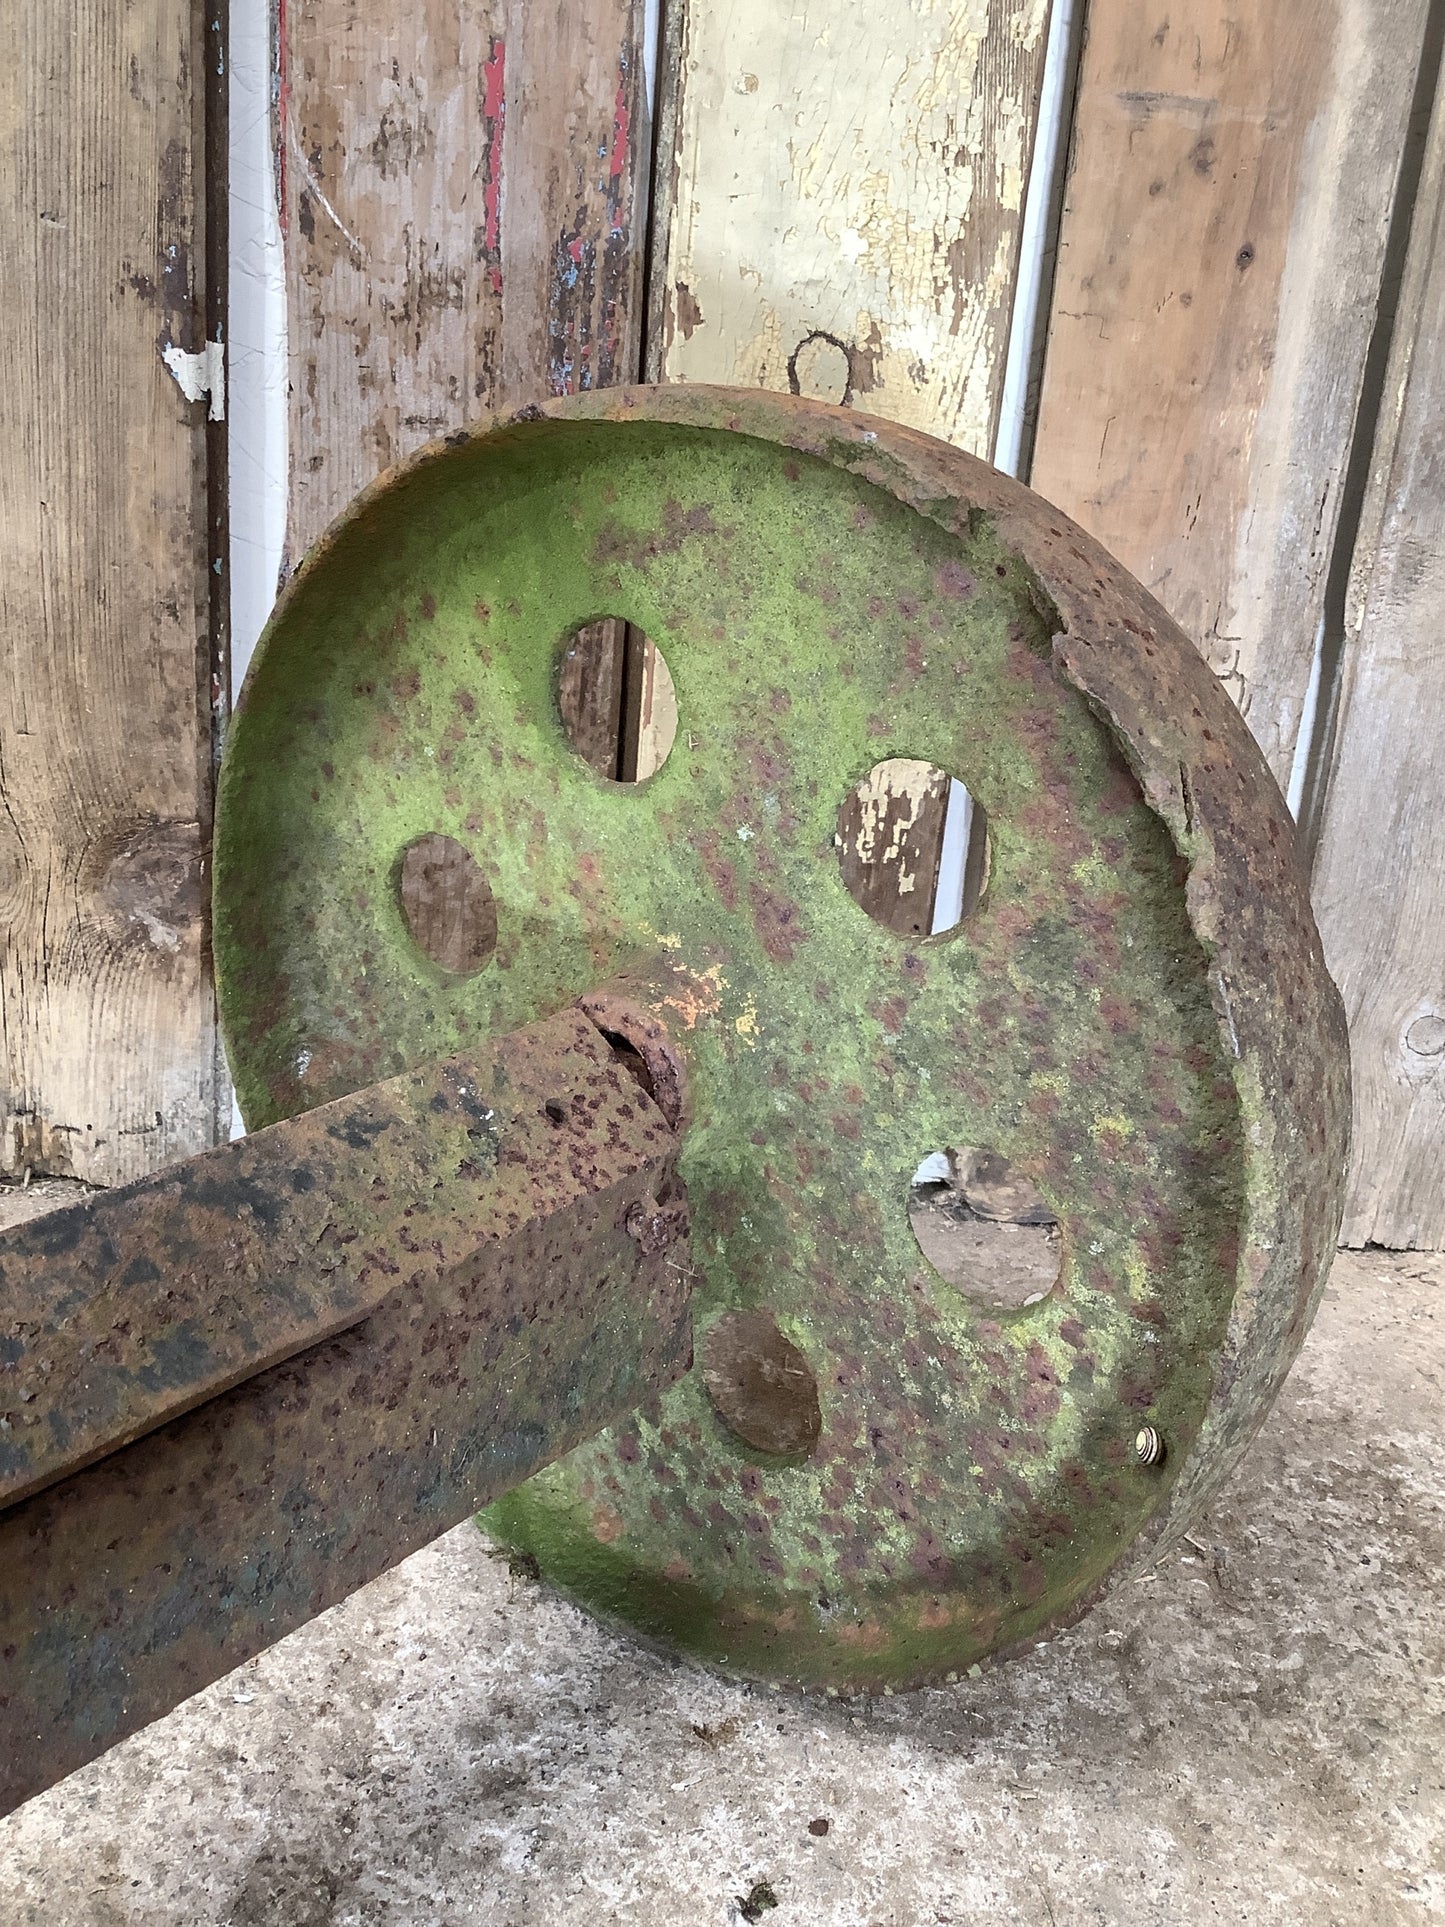 Old Cast Iron Metal 6 Hole Centres Hen House Trolly Wheels